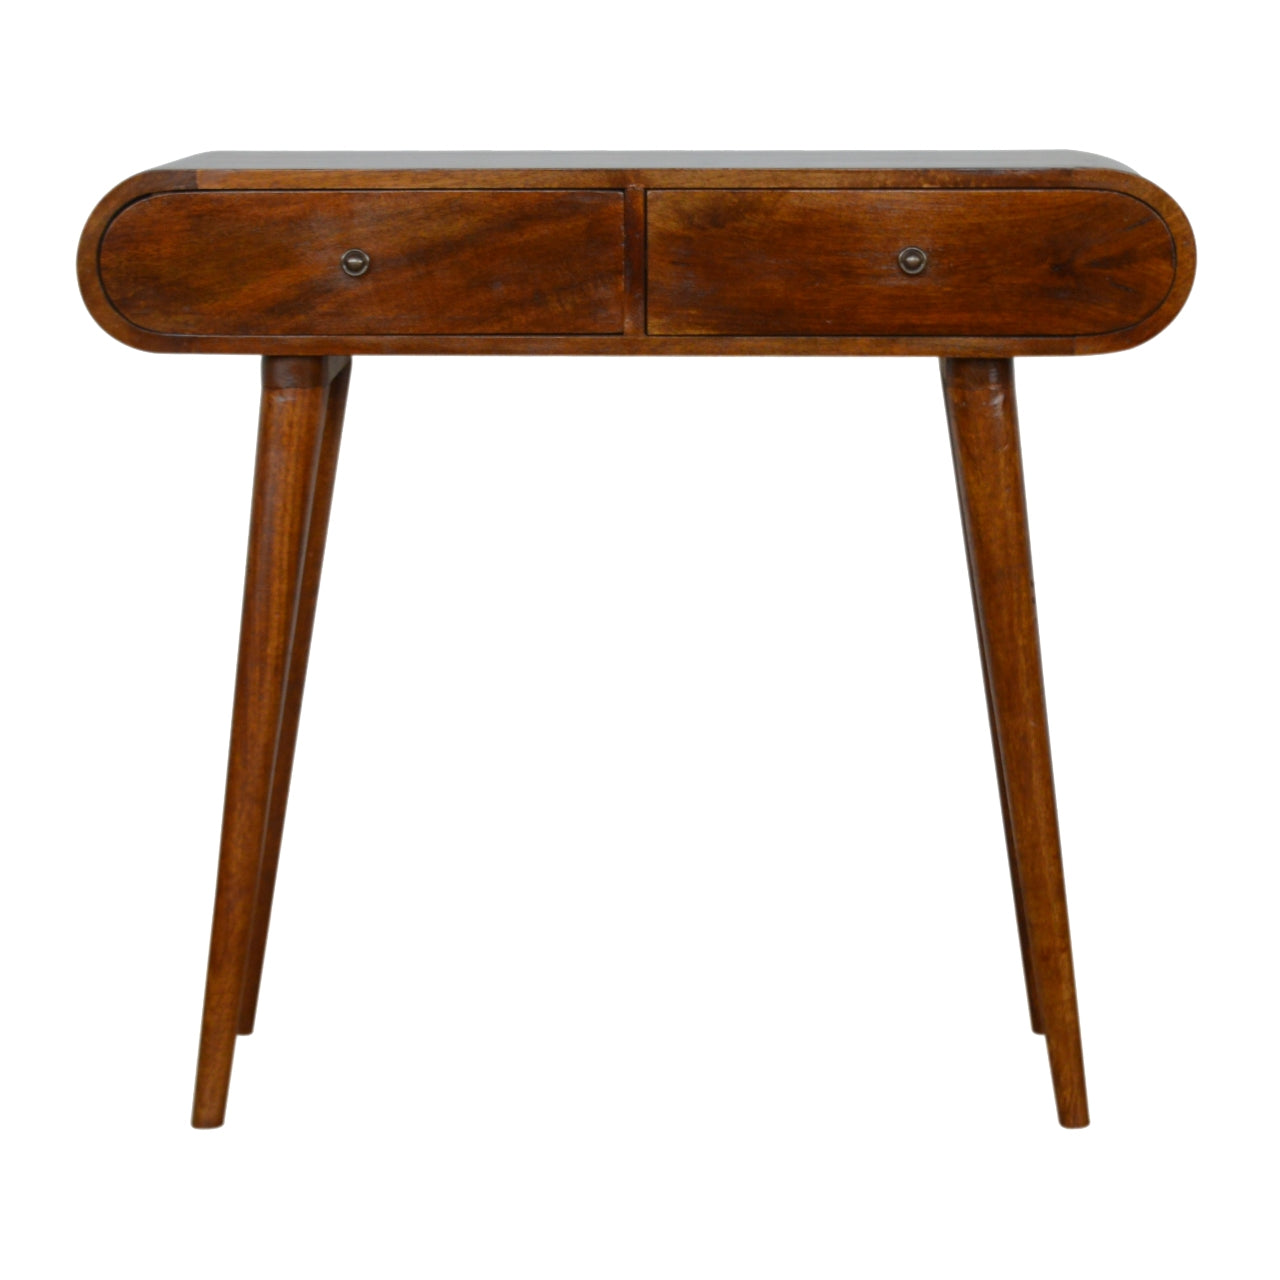 Solid Wood Chestnut Curved Edge Console Table